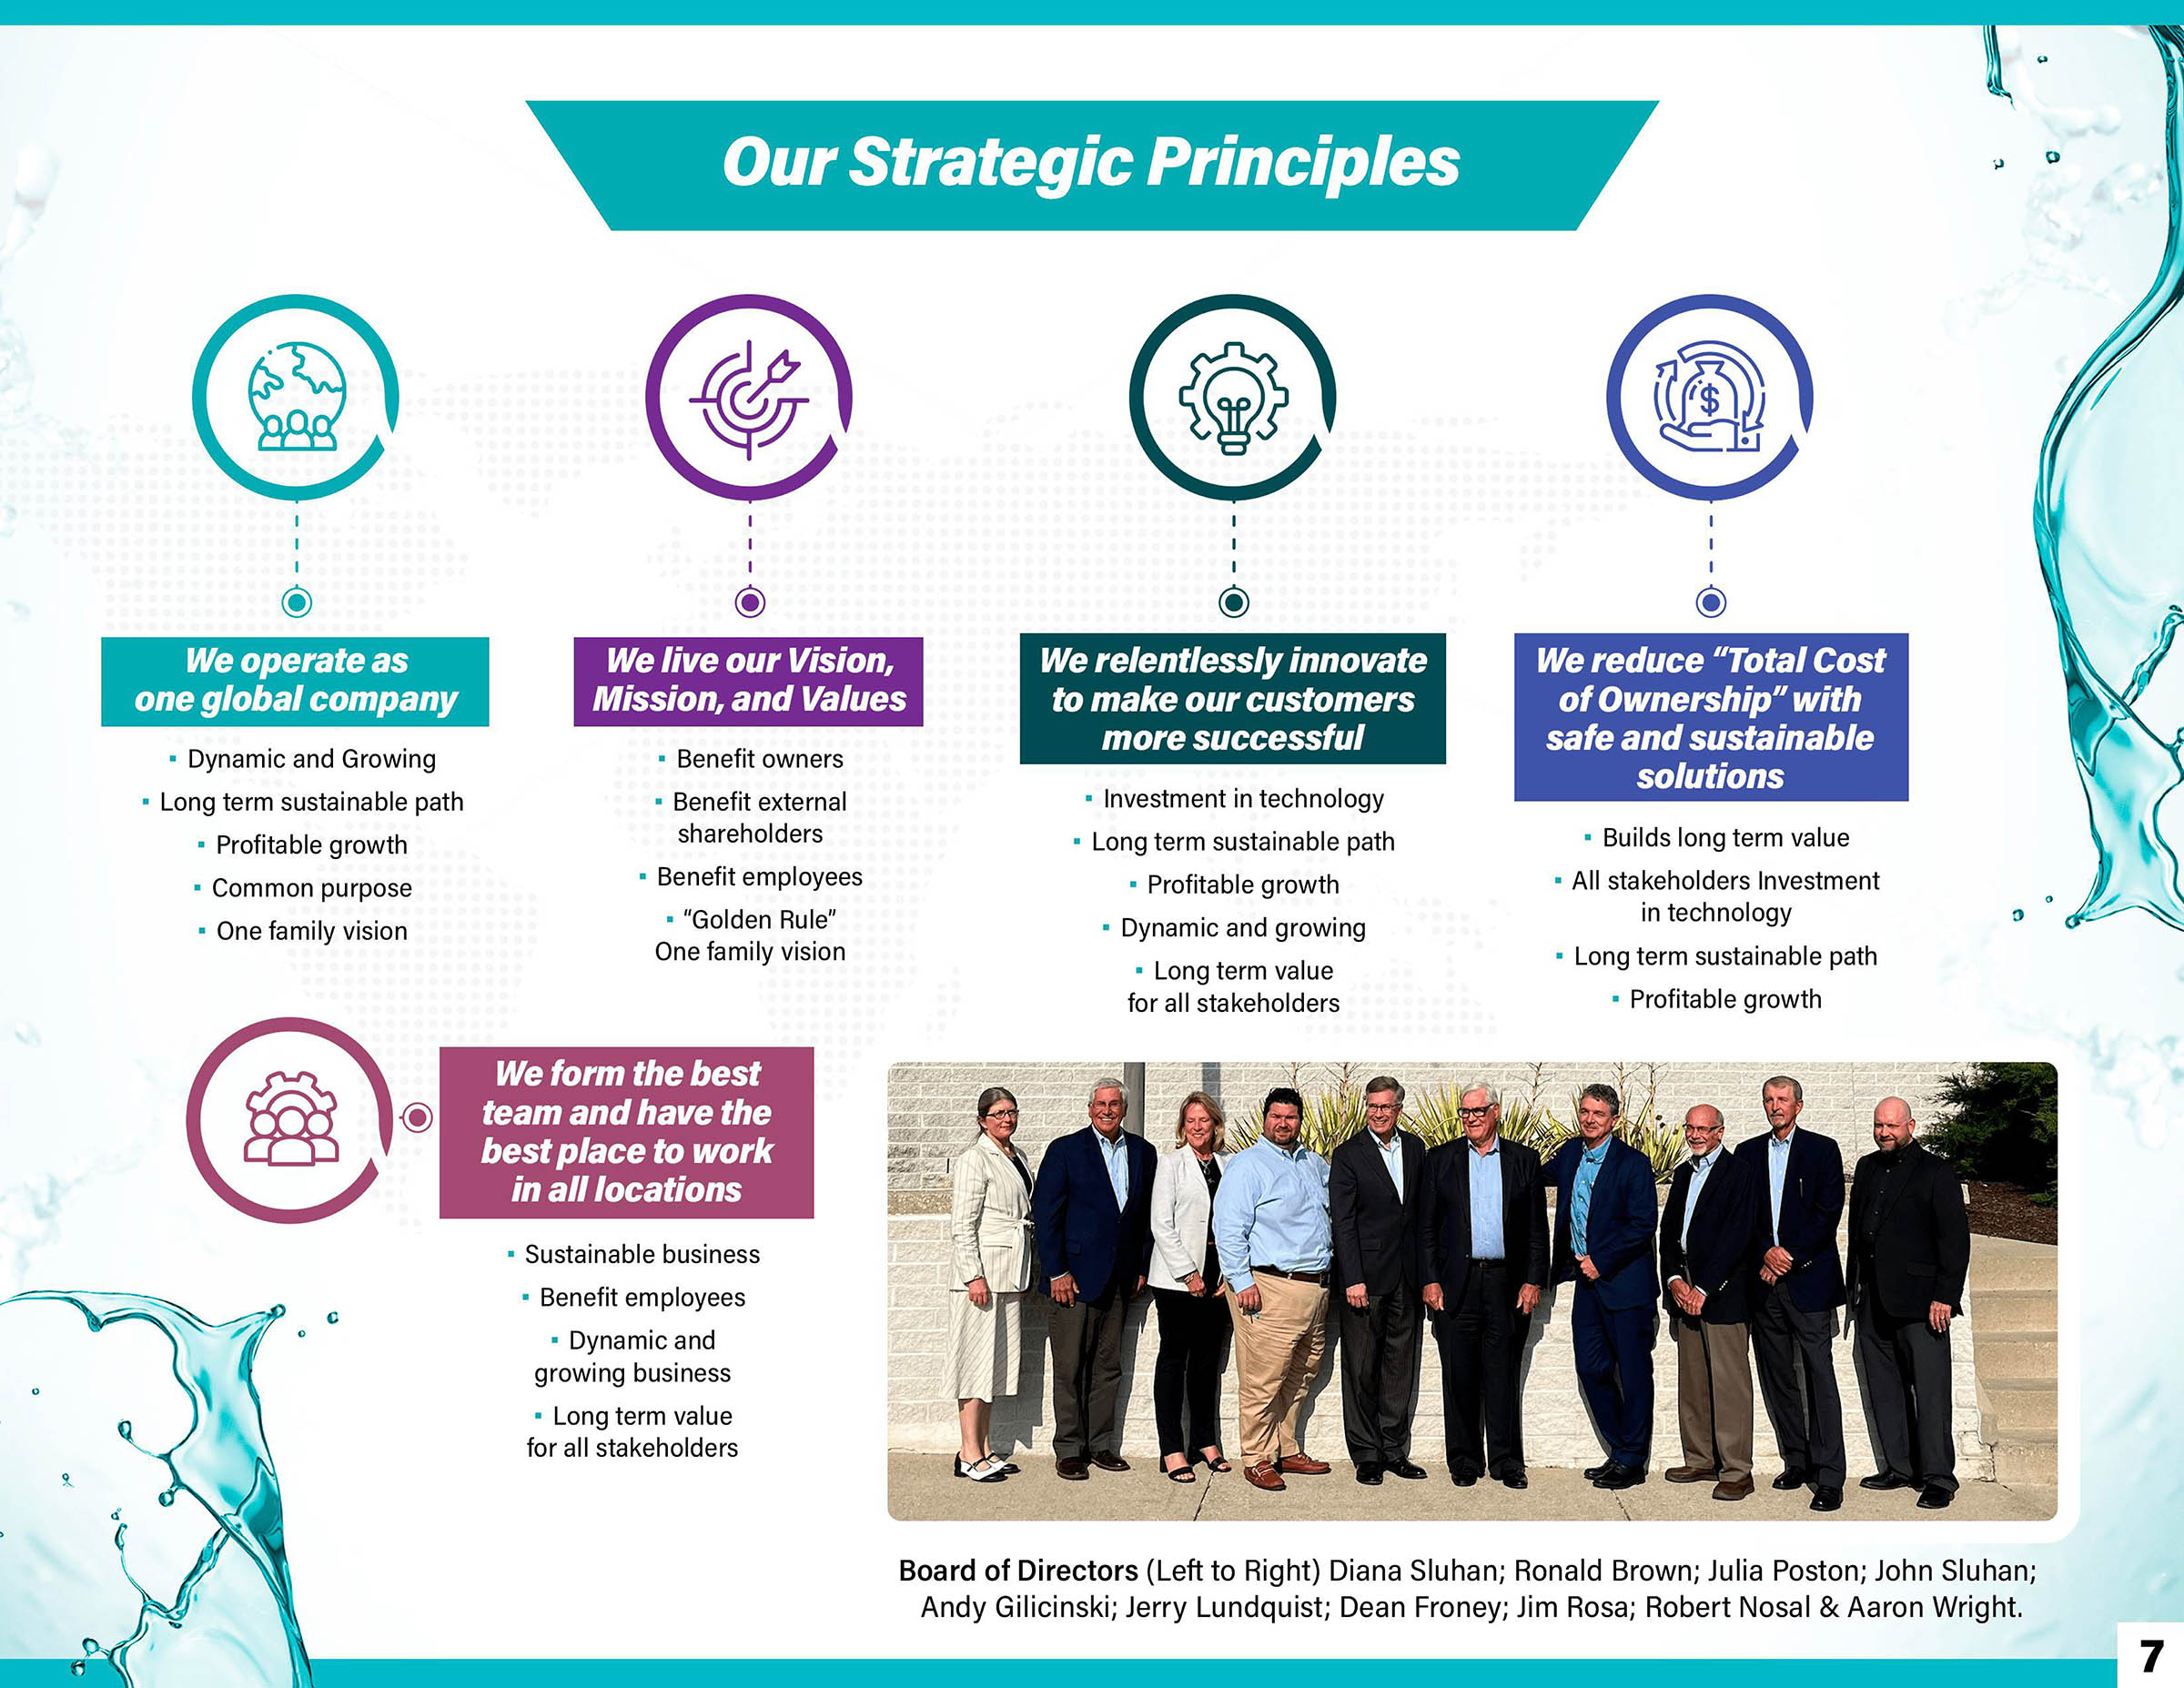 Sustainability Report - Our Strategic Principles